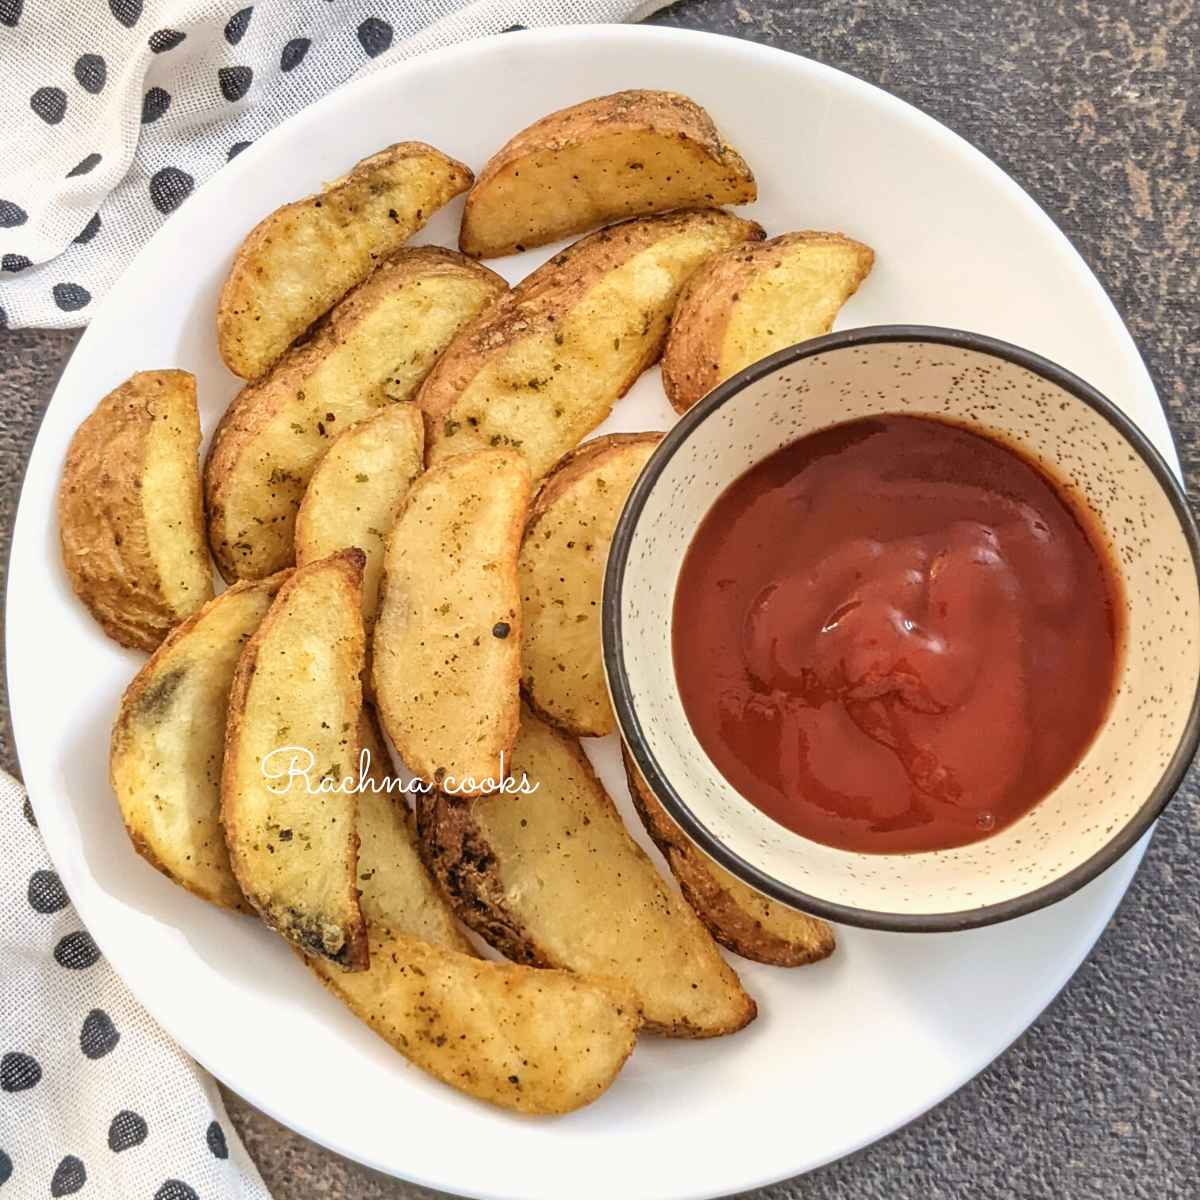 Crispy potato wedges served on a white plate with a dip in the bowl.